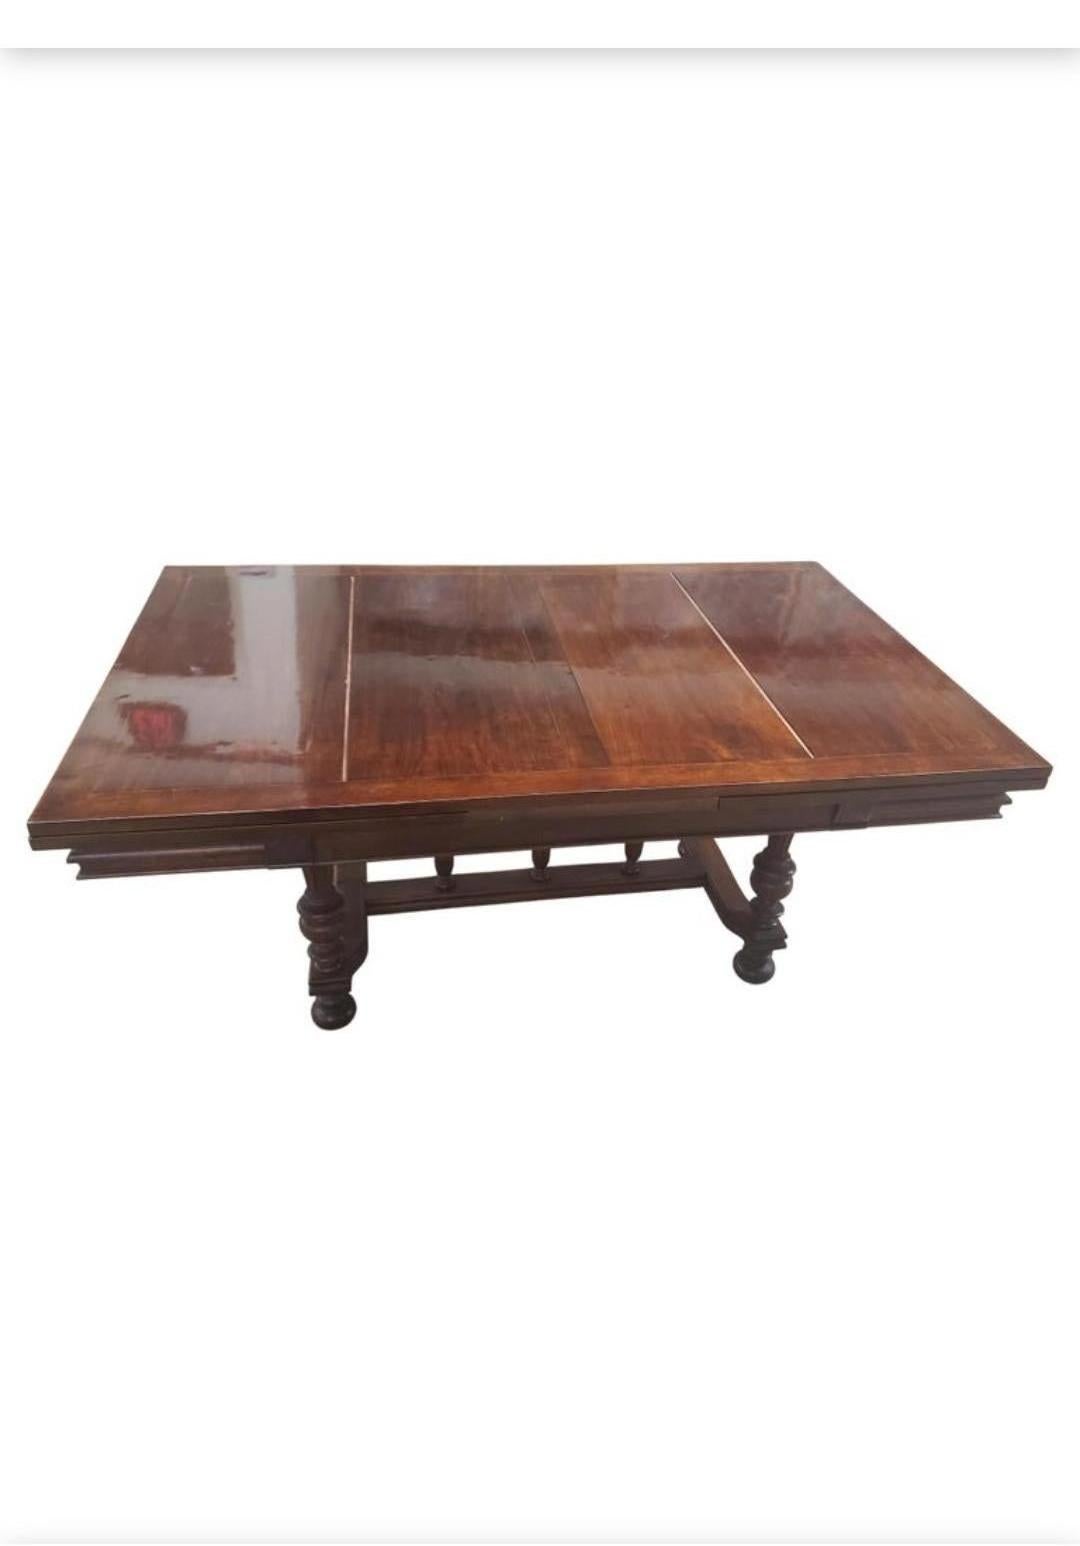 Antique Louis XVI solid walnut draw leaf dining table with top support provided by four substantial tapered and fluted column legs along with 3 columns over the stretcher design which allows maximum foot room yet sturdy reinforcement to the design.